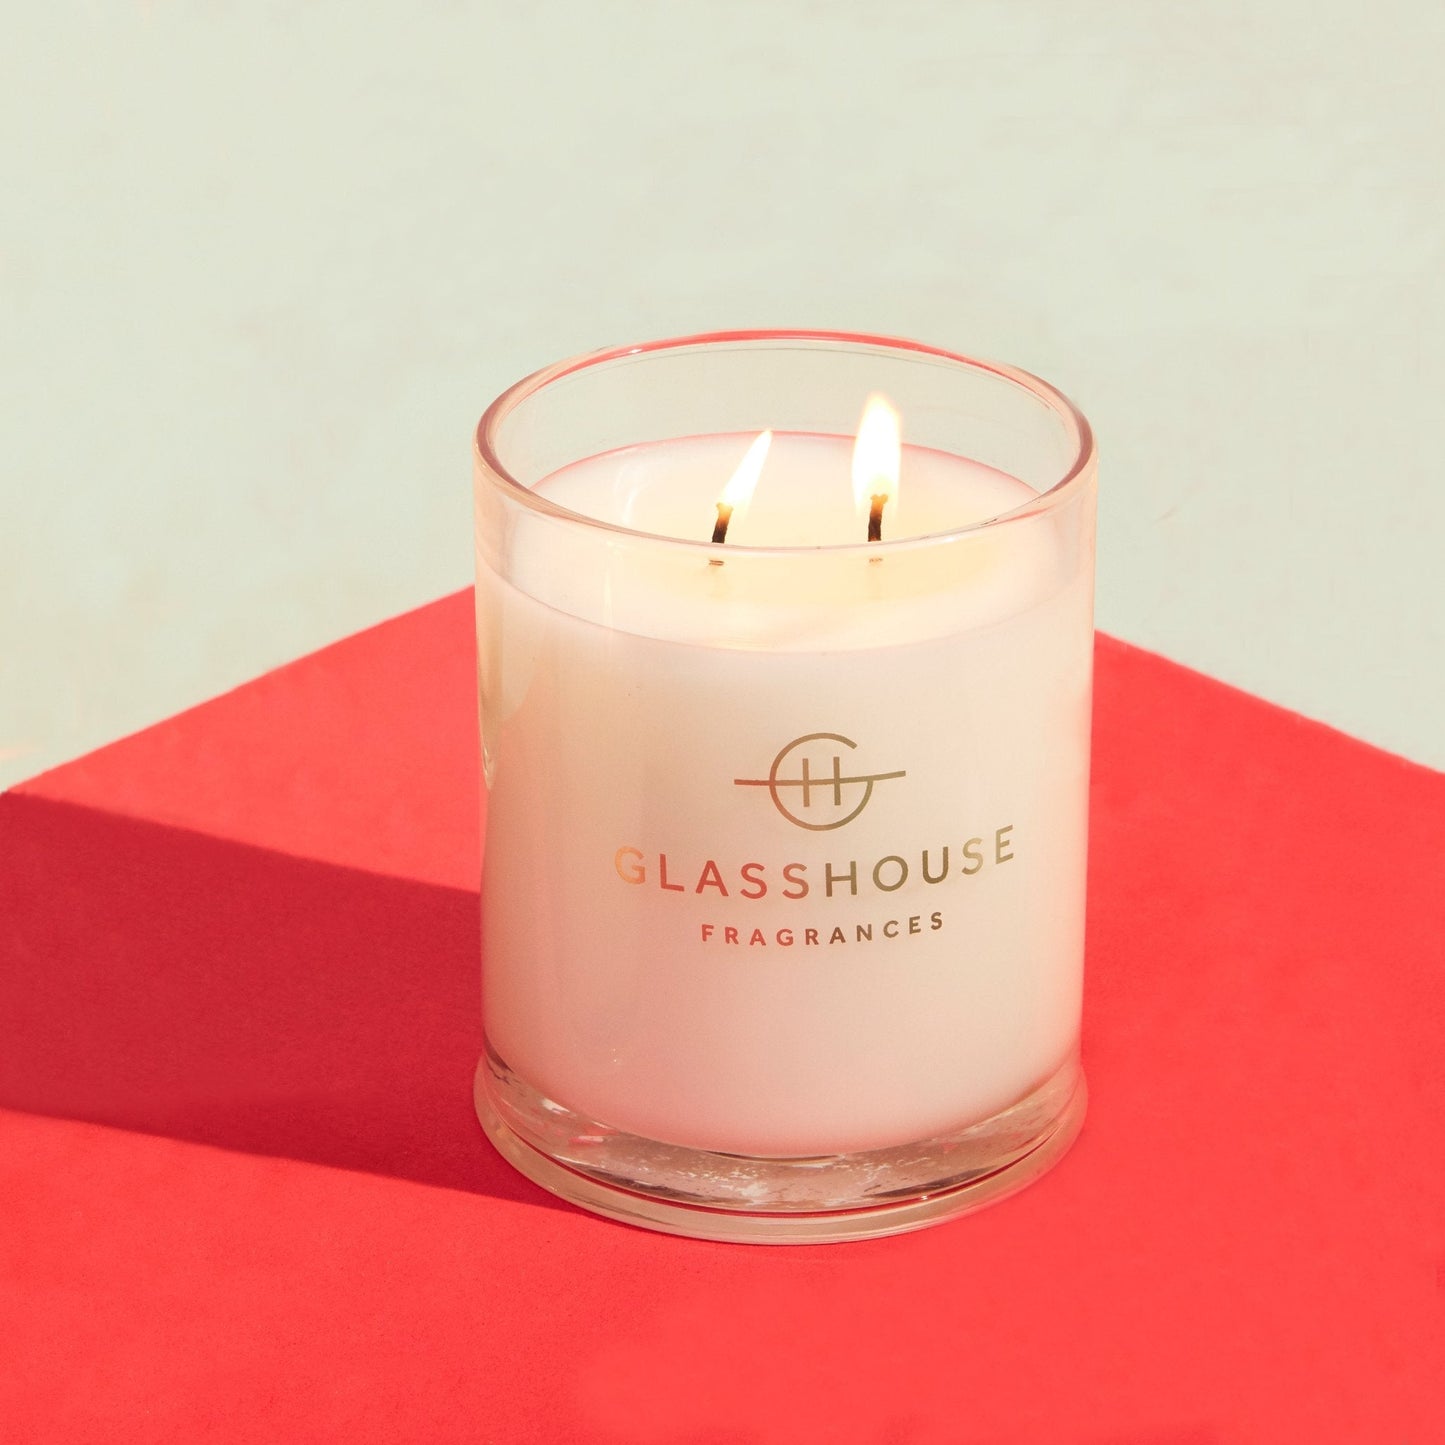 Glasshouse Fragrances - Kyoto in Bloom Candle